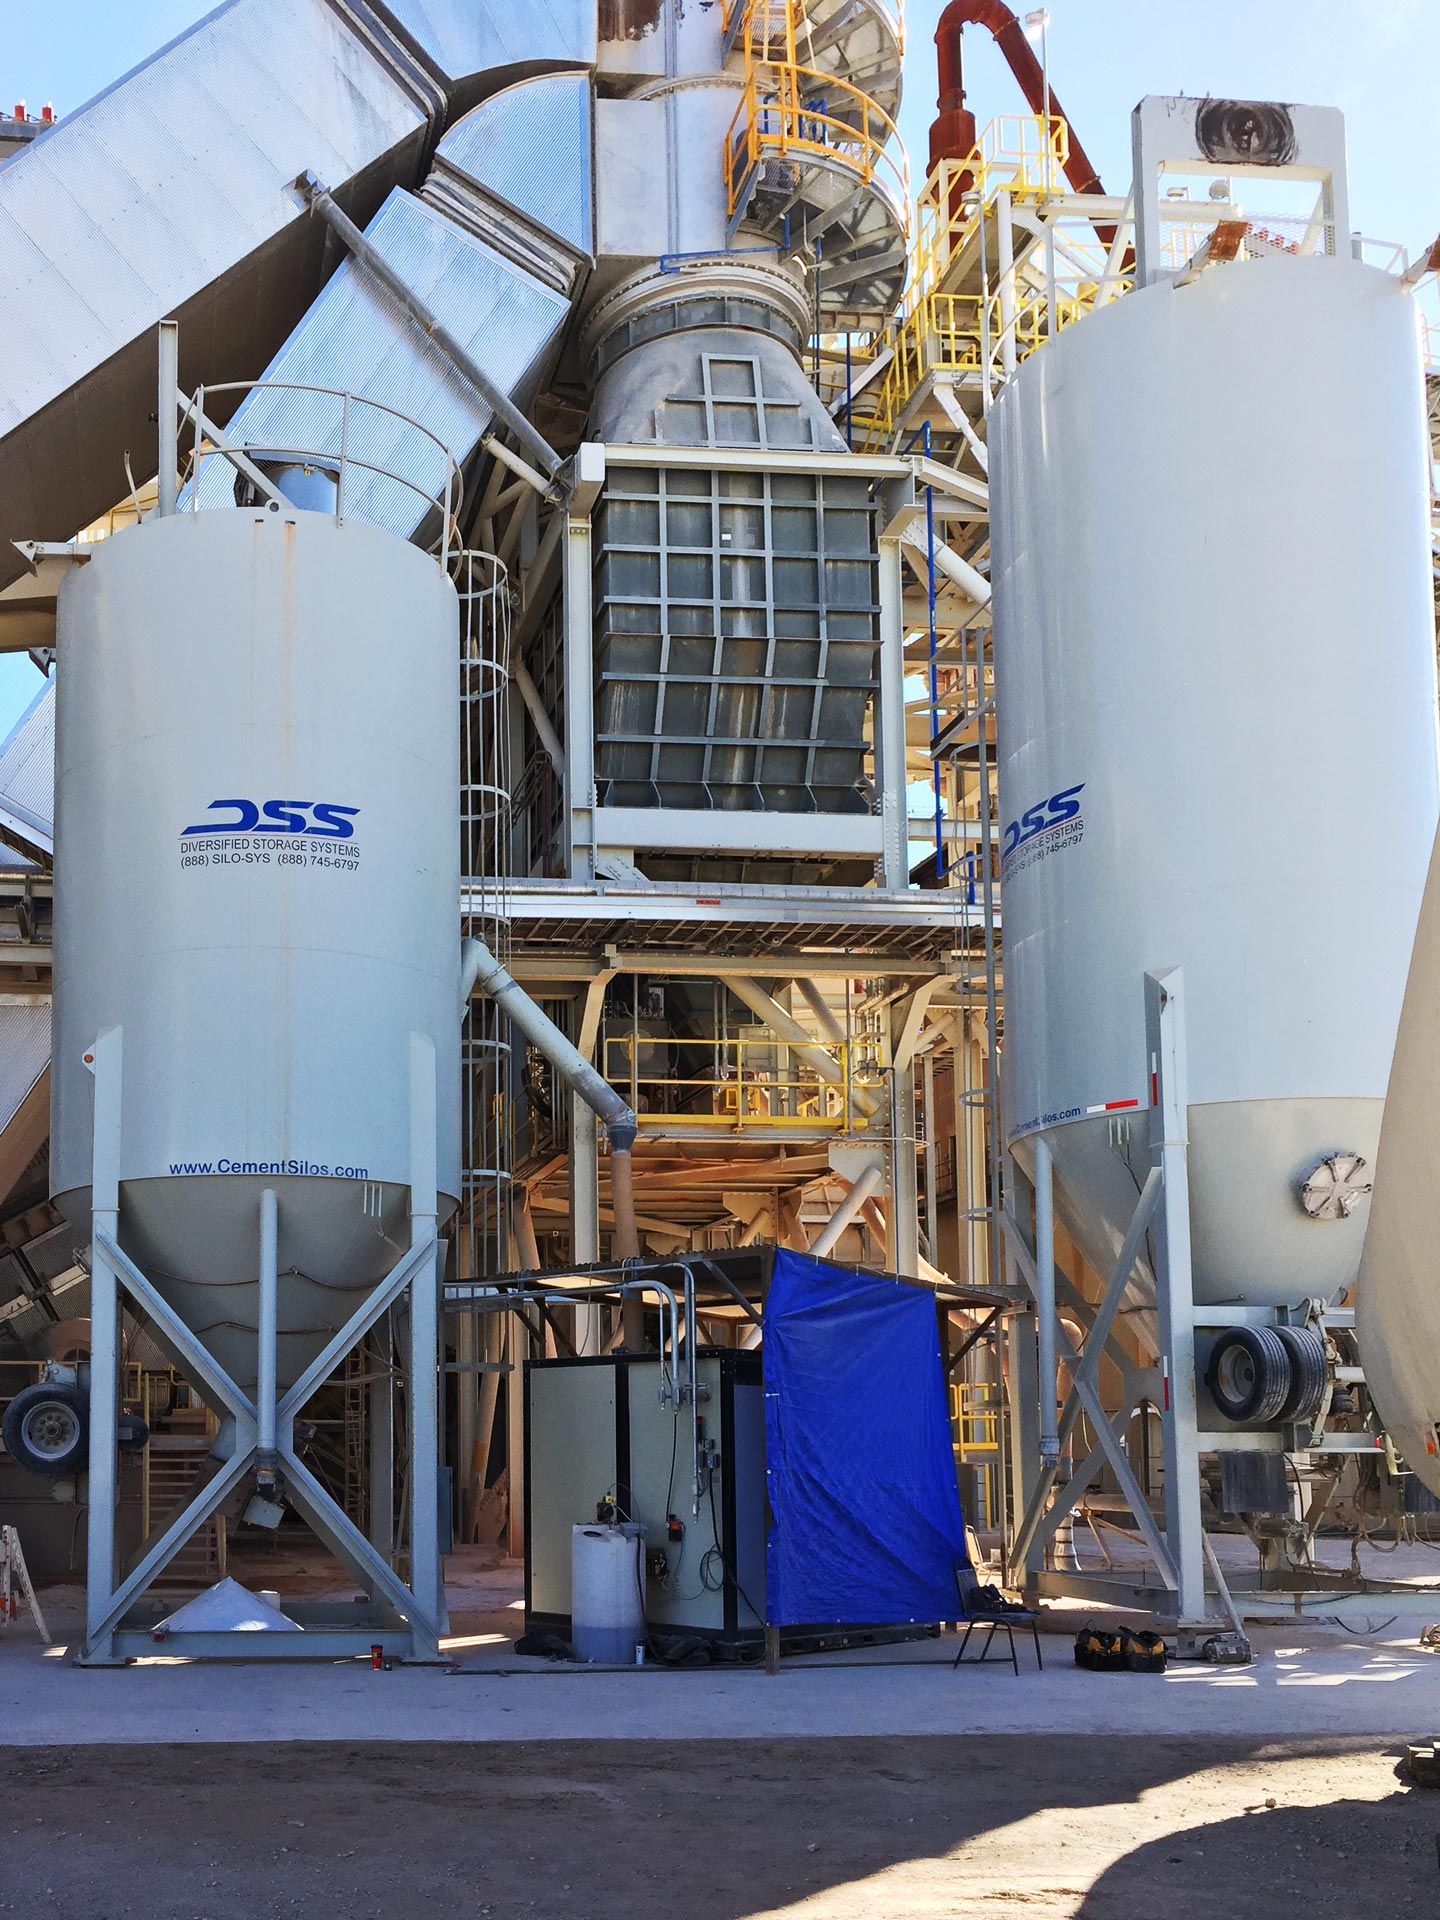 cement plant feeder silos for emissions control process dss projects 1920x1440 3x4 1